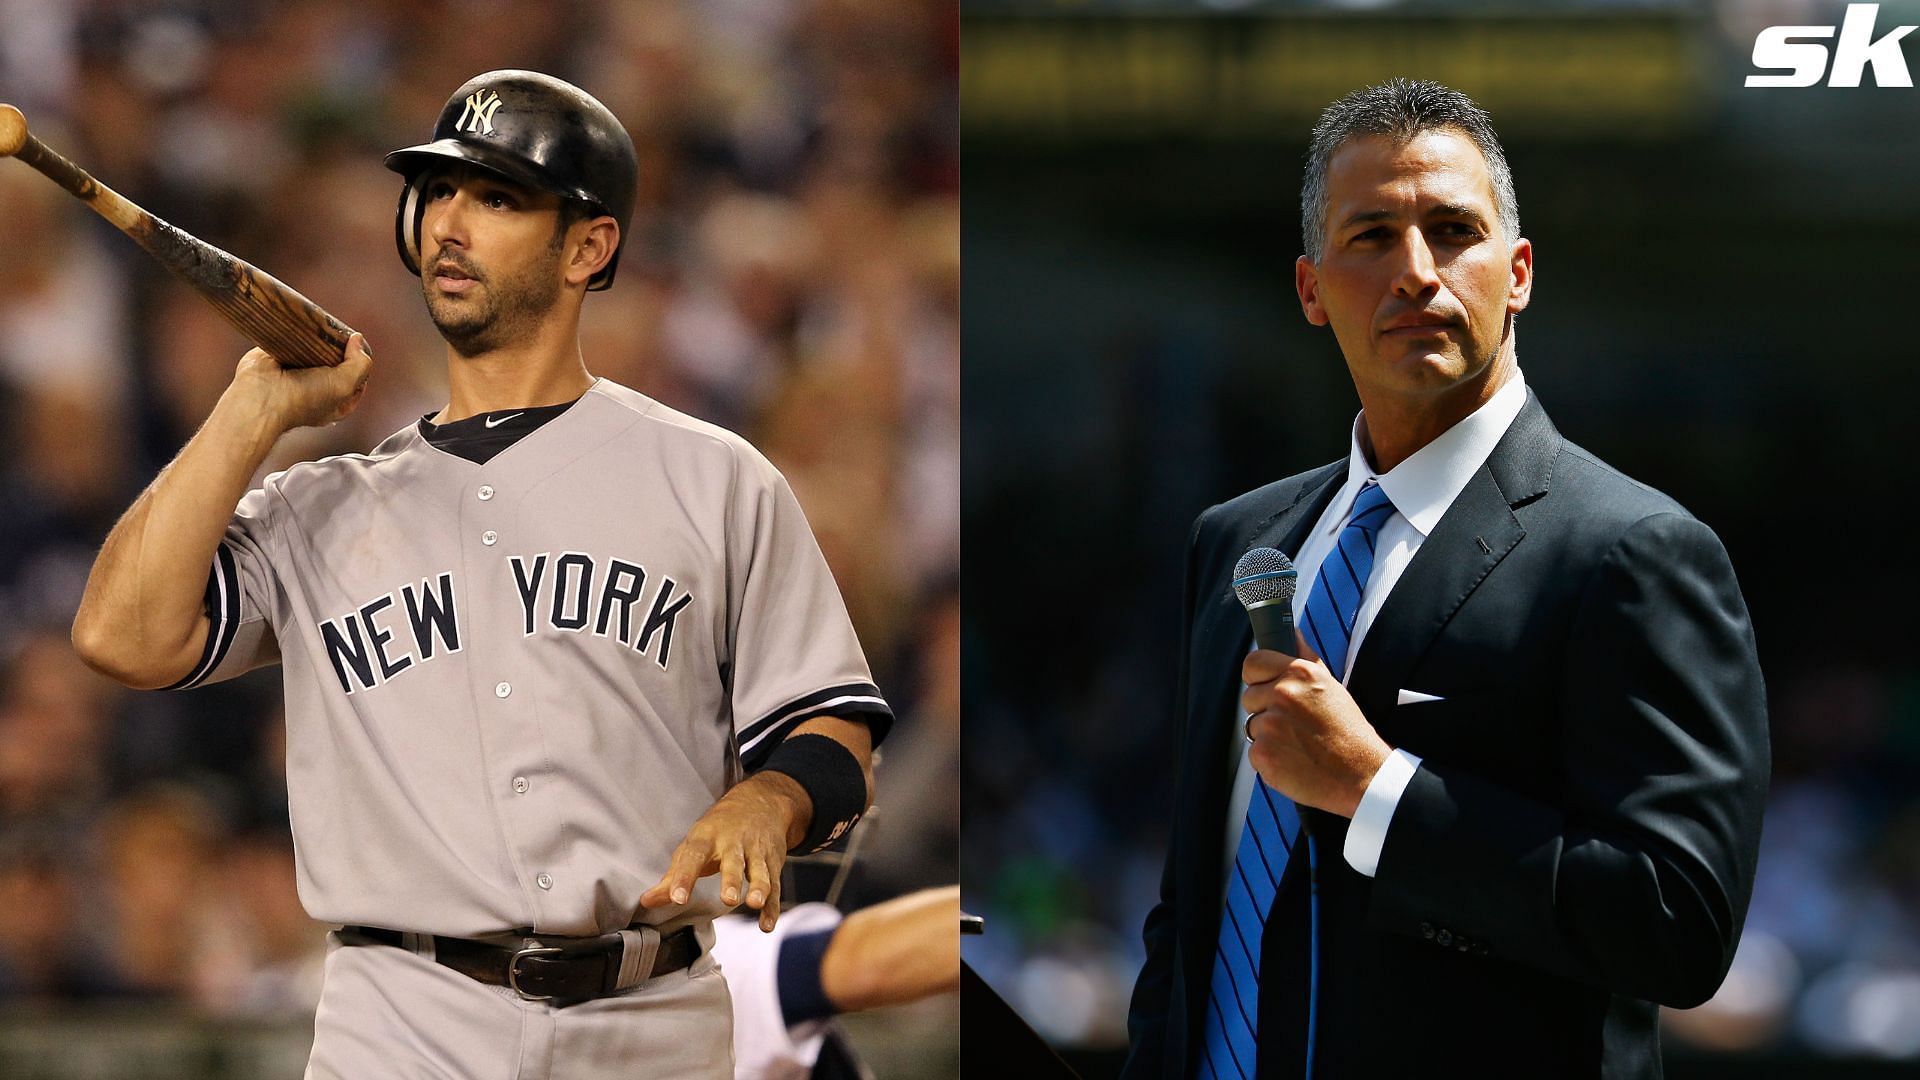 Yankees icon Jorge Posada hears &lsquo;Andy Pettitte&rsquo; when wife asks &lsquo;Can I pet it?&rsquo; while pointing to their pet dog 